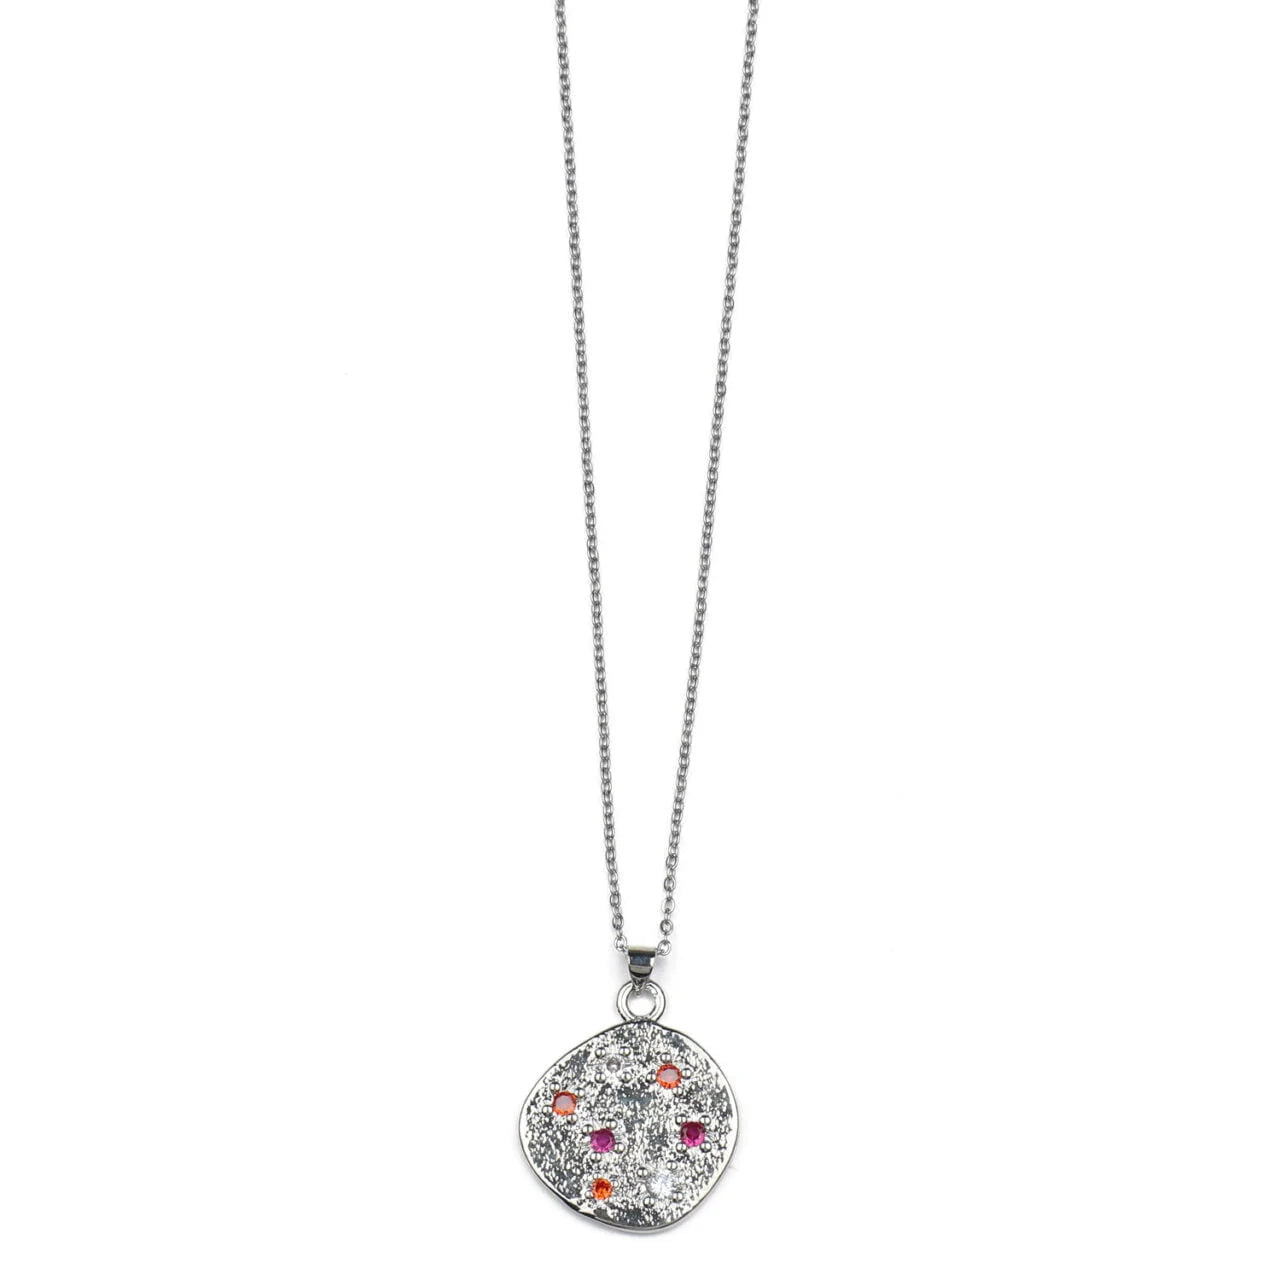 Fab Gifts | Jewellery Necklace Silver Multi Stone Pink by Weirs of Baggot Street